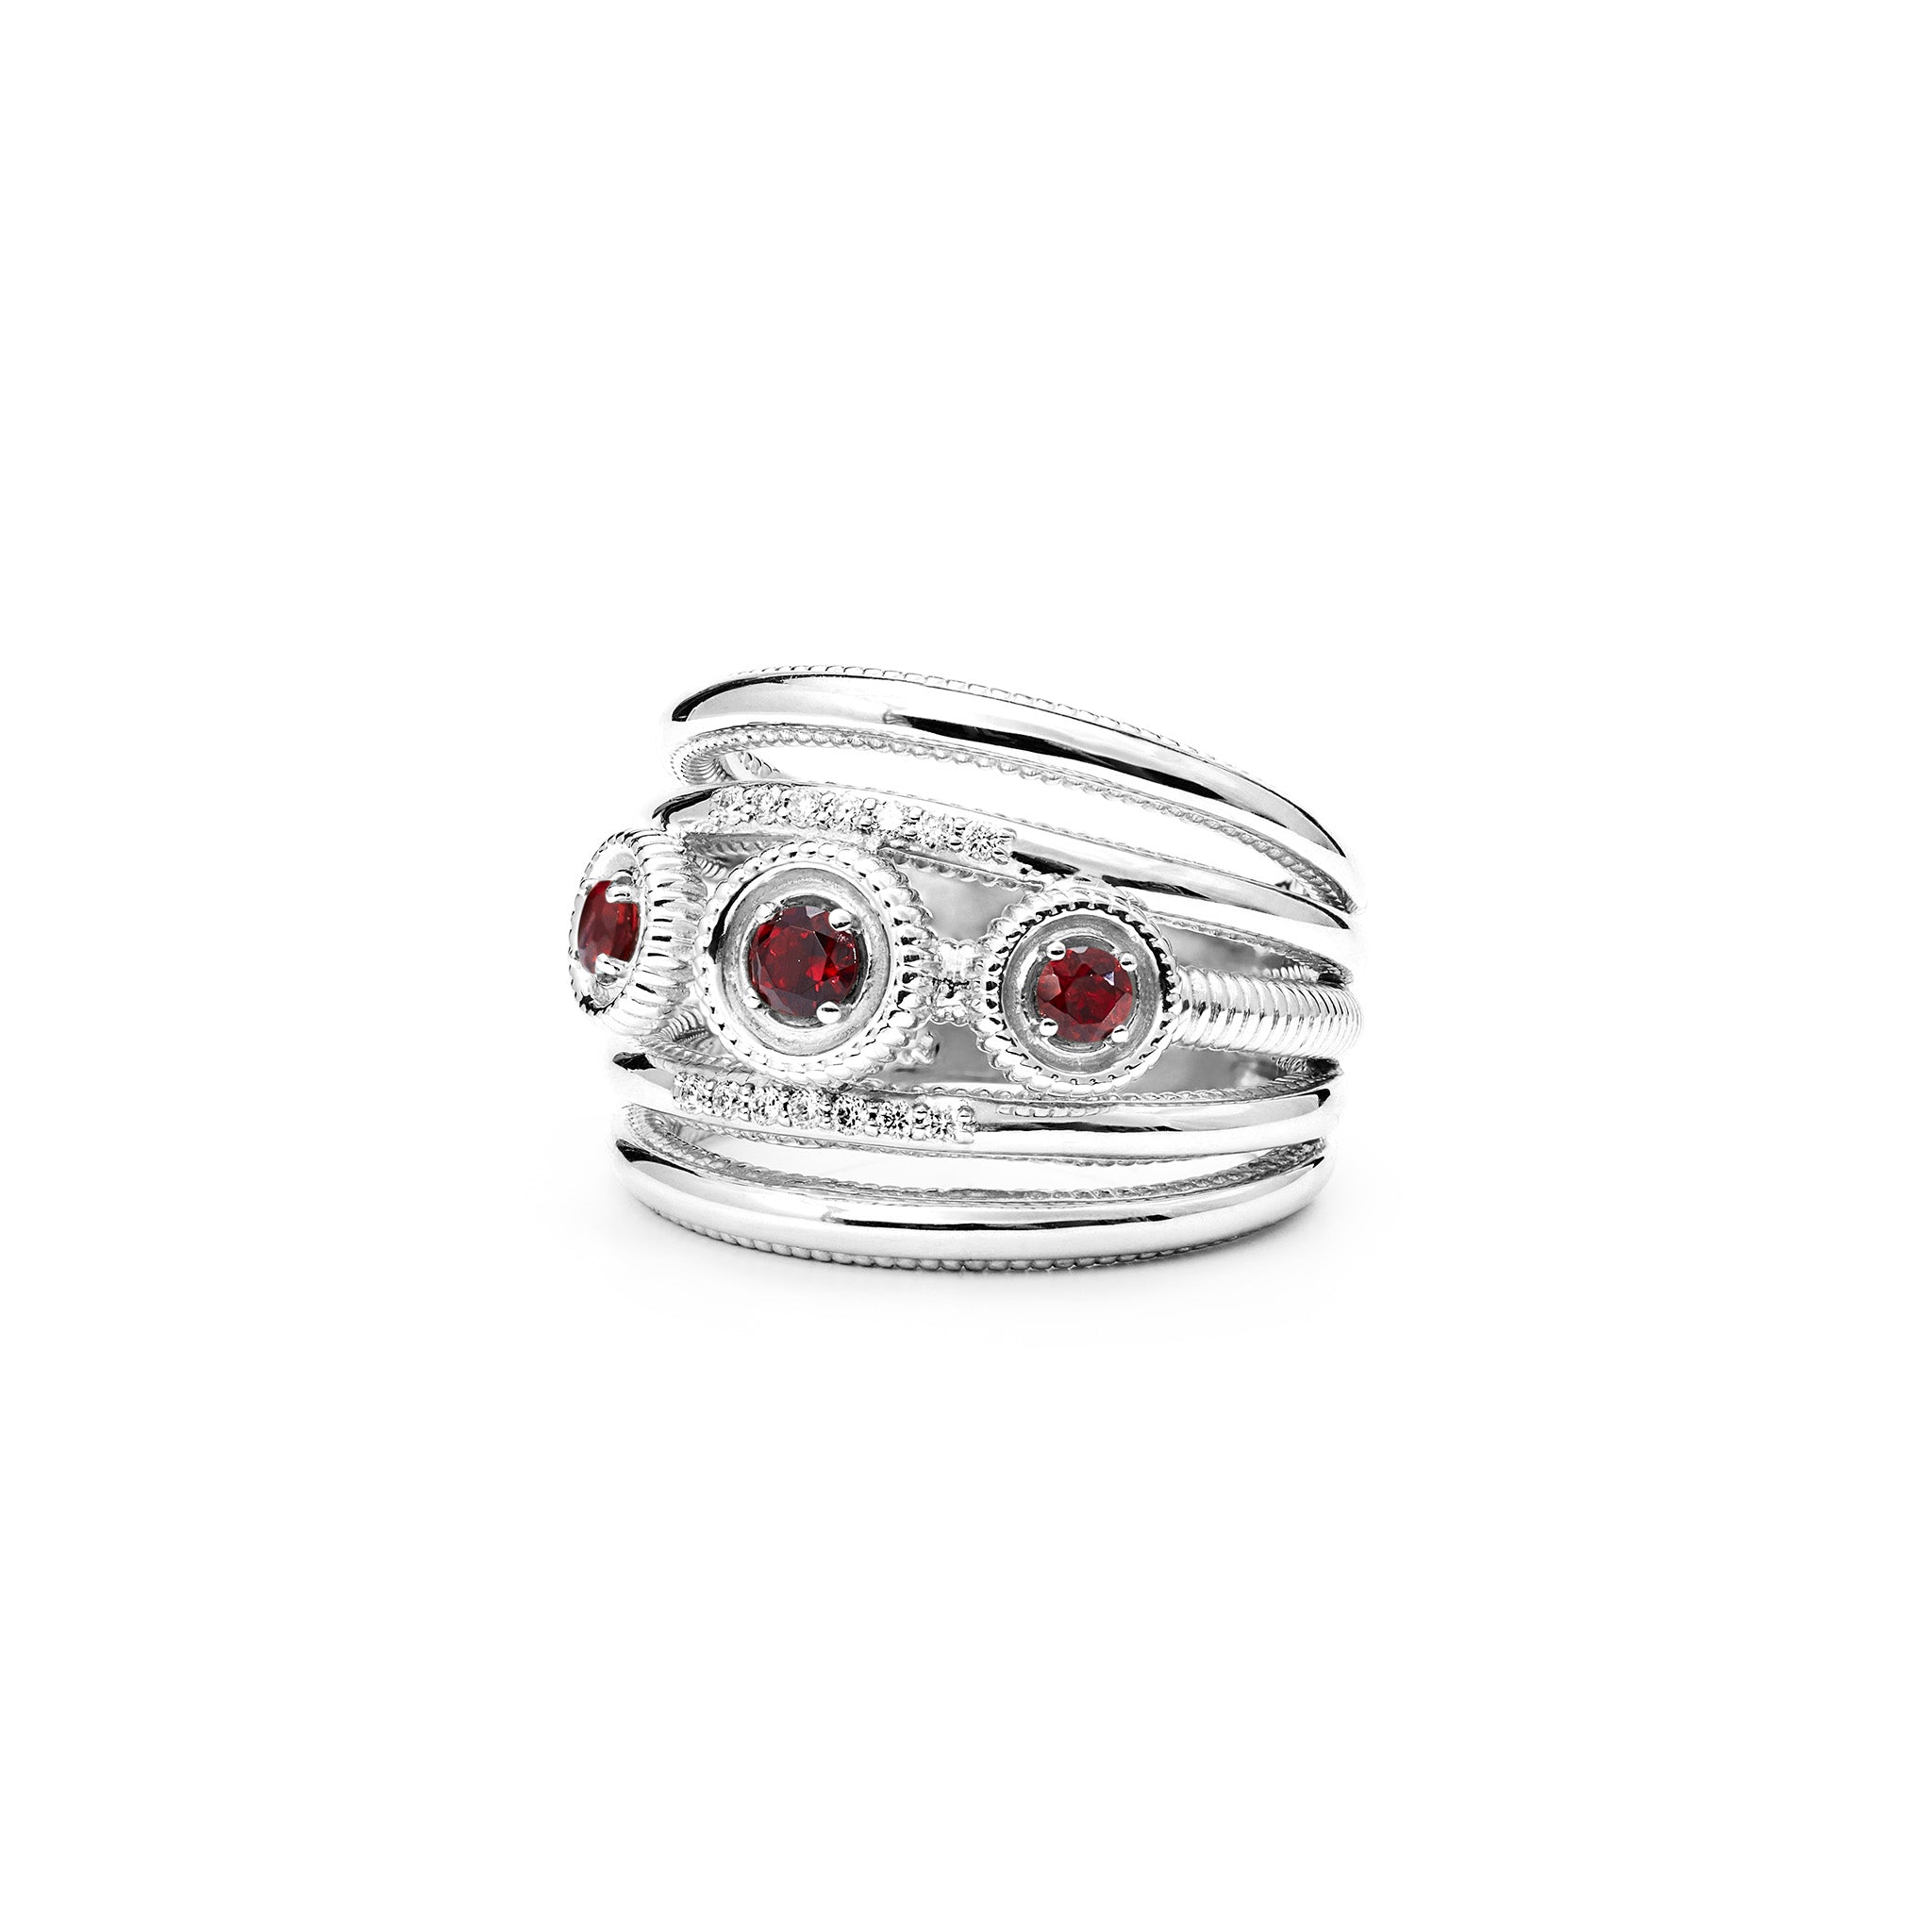 Max Band Ring with Garnet and Diamonds